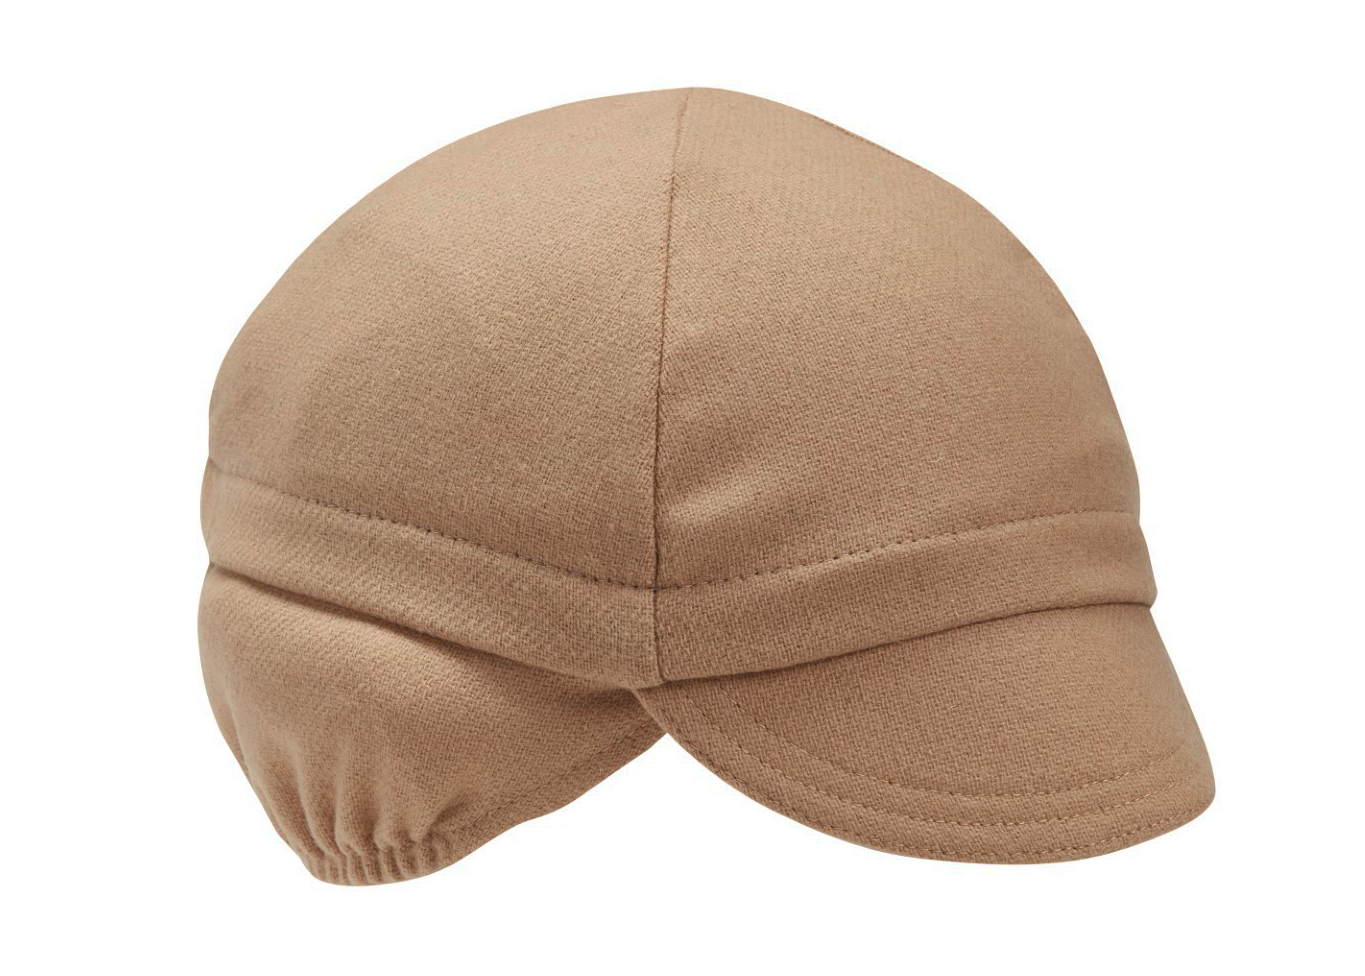 Camel Wool Flannel Ear Flap Cap. Angled view.